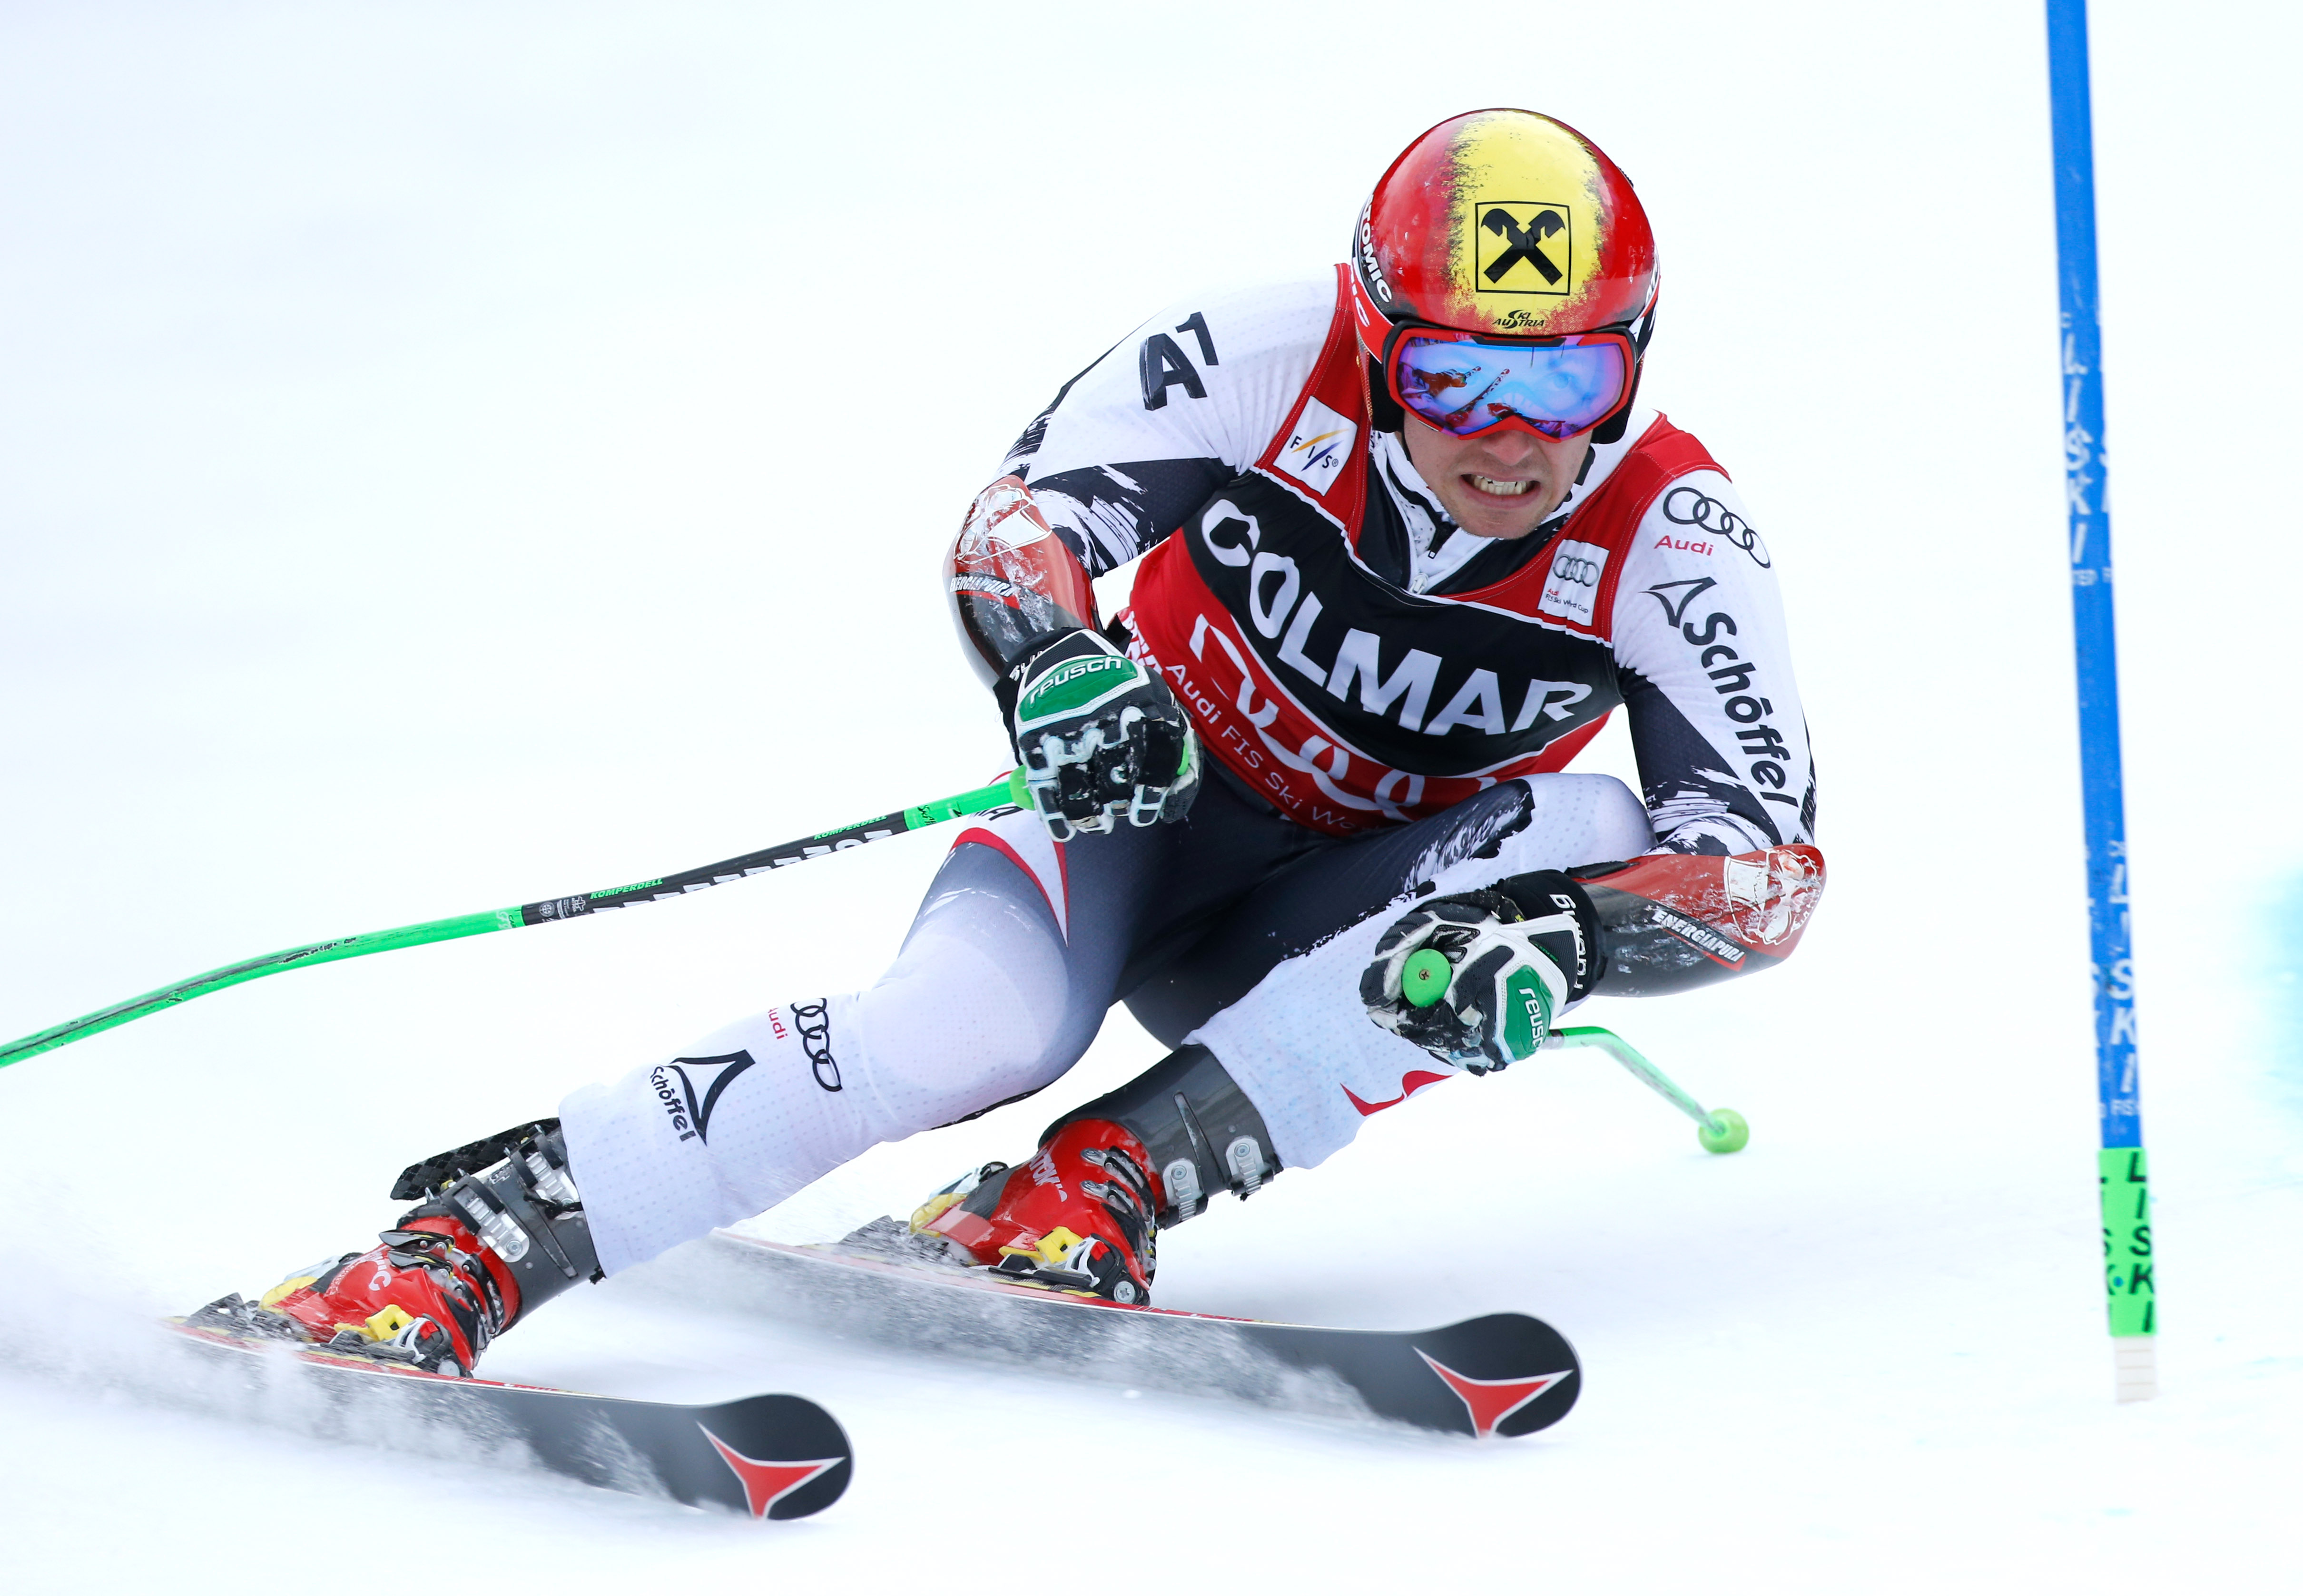 Memo developing Mathis Hirscher wins another GS, Ligety on podium in Alta Badia